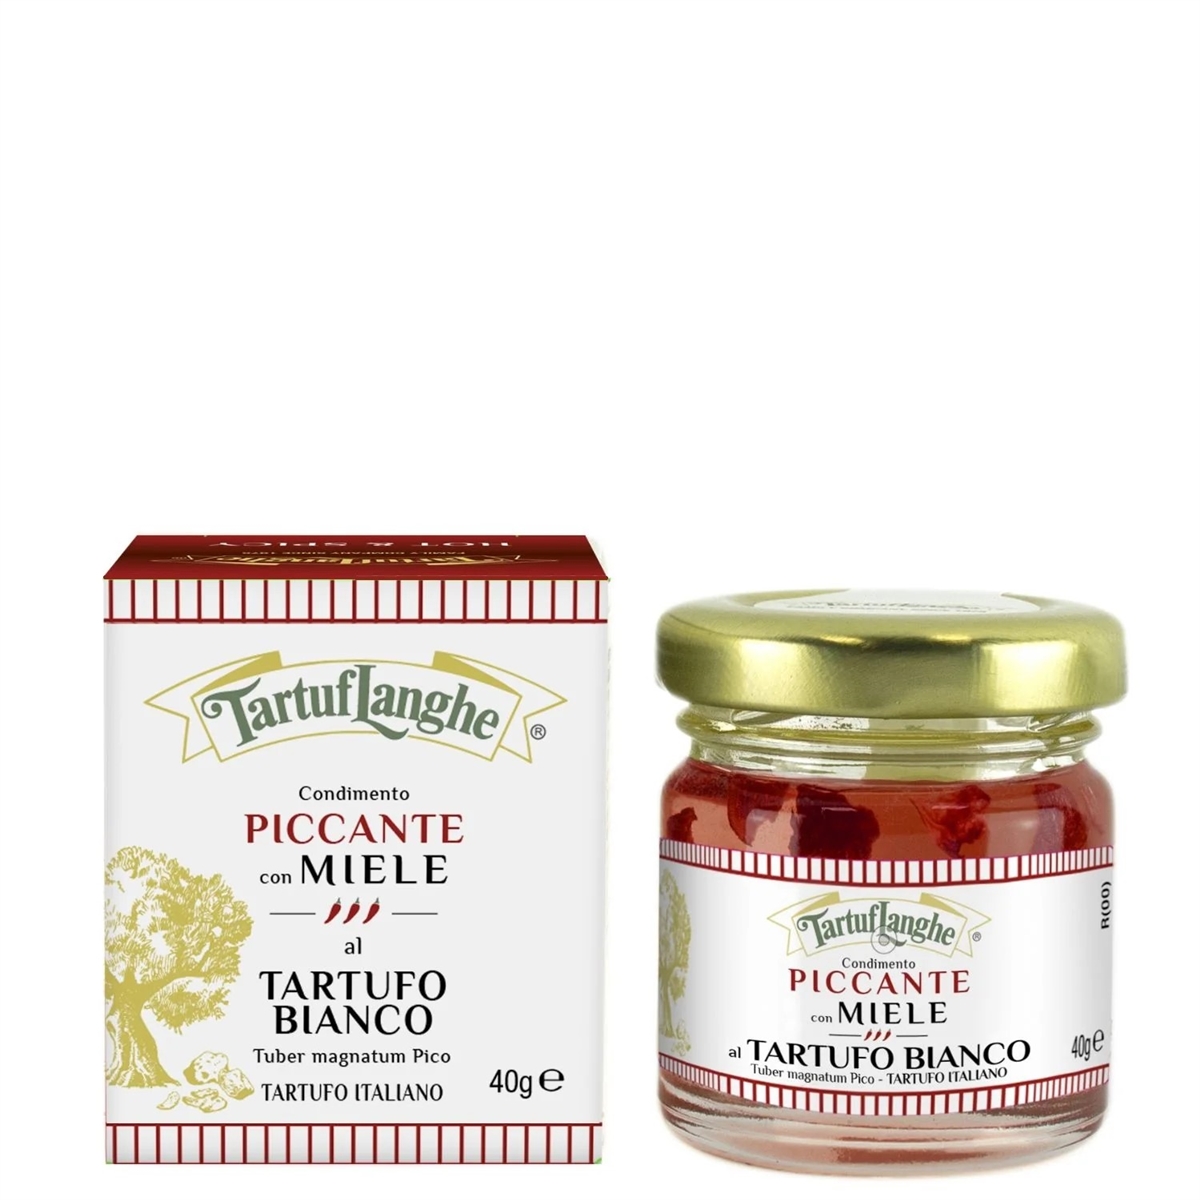 Hot & Spicy - Spicy Acacia Honey with White Truffle - 40 g